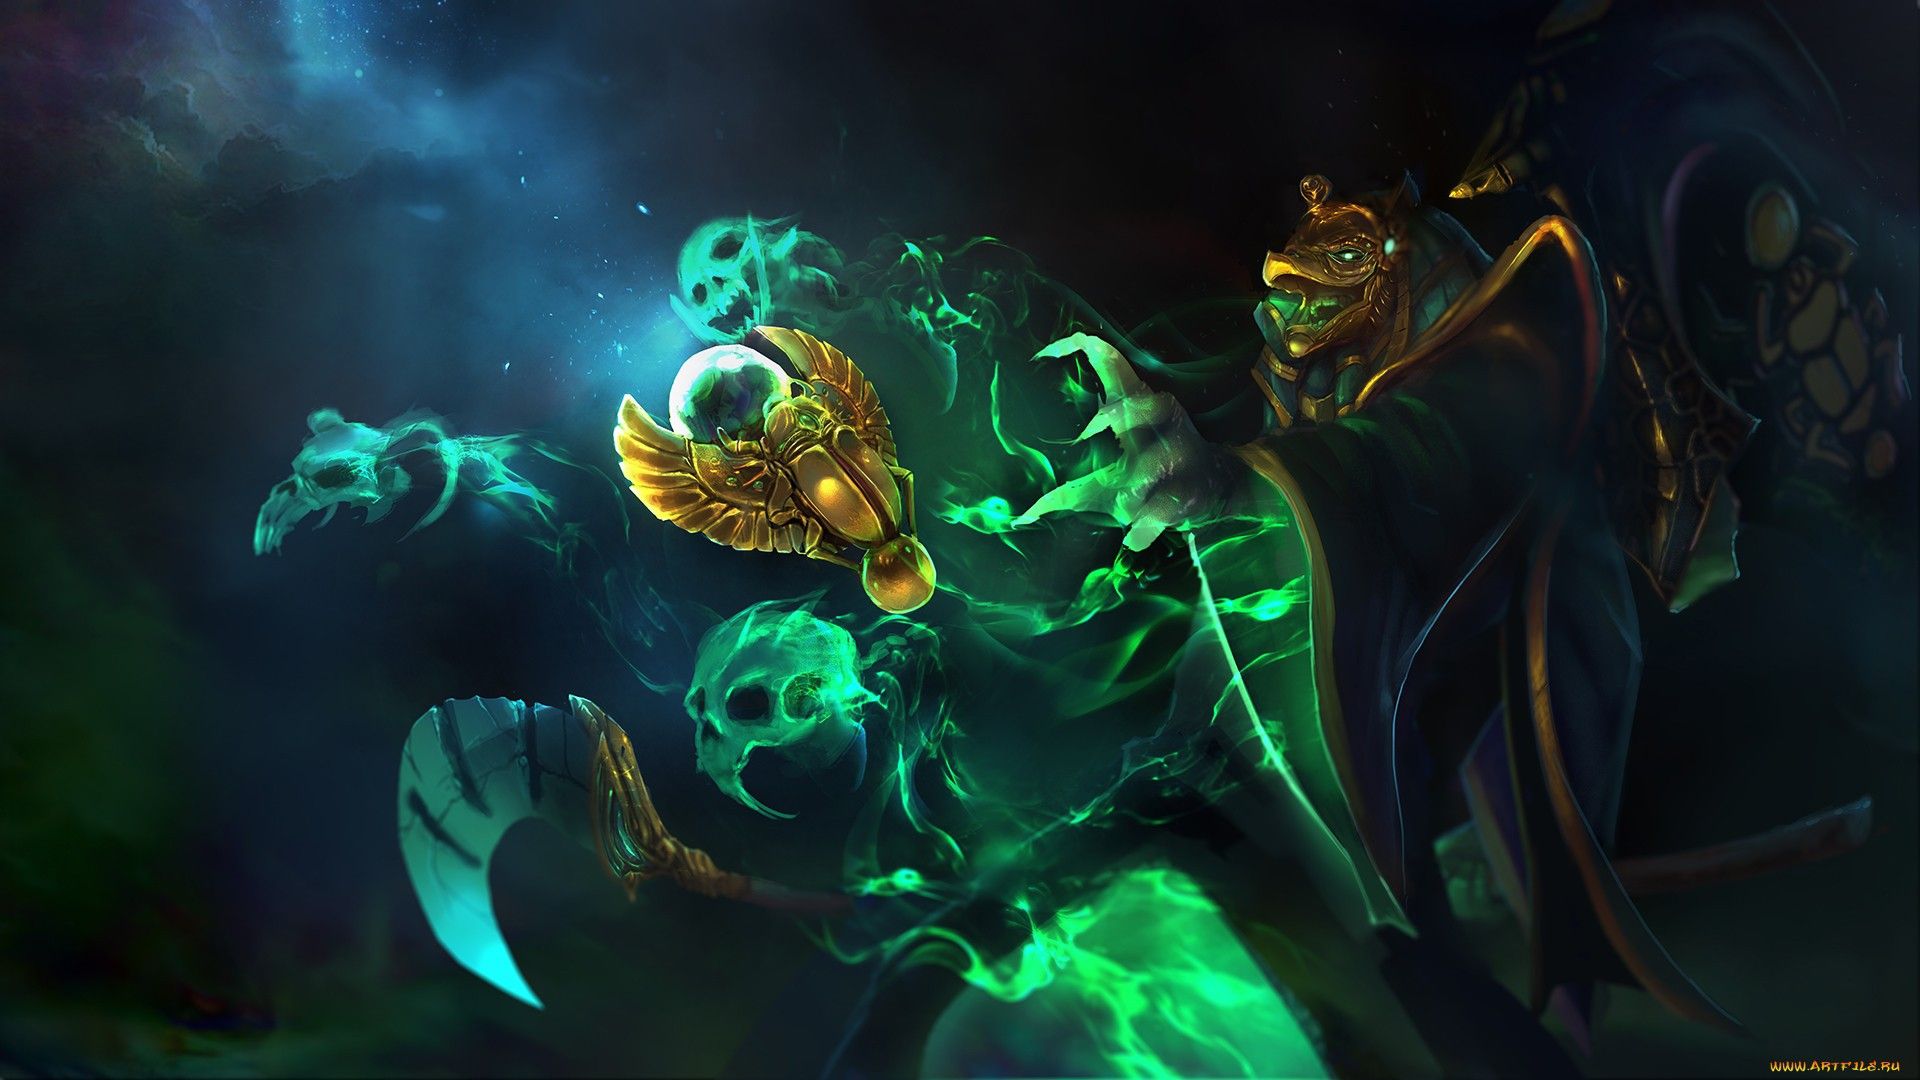 Amazing Dota 2 HD Wallpaper. Gaming Background for PC